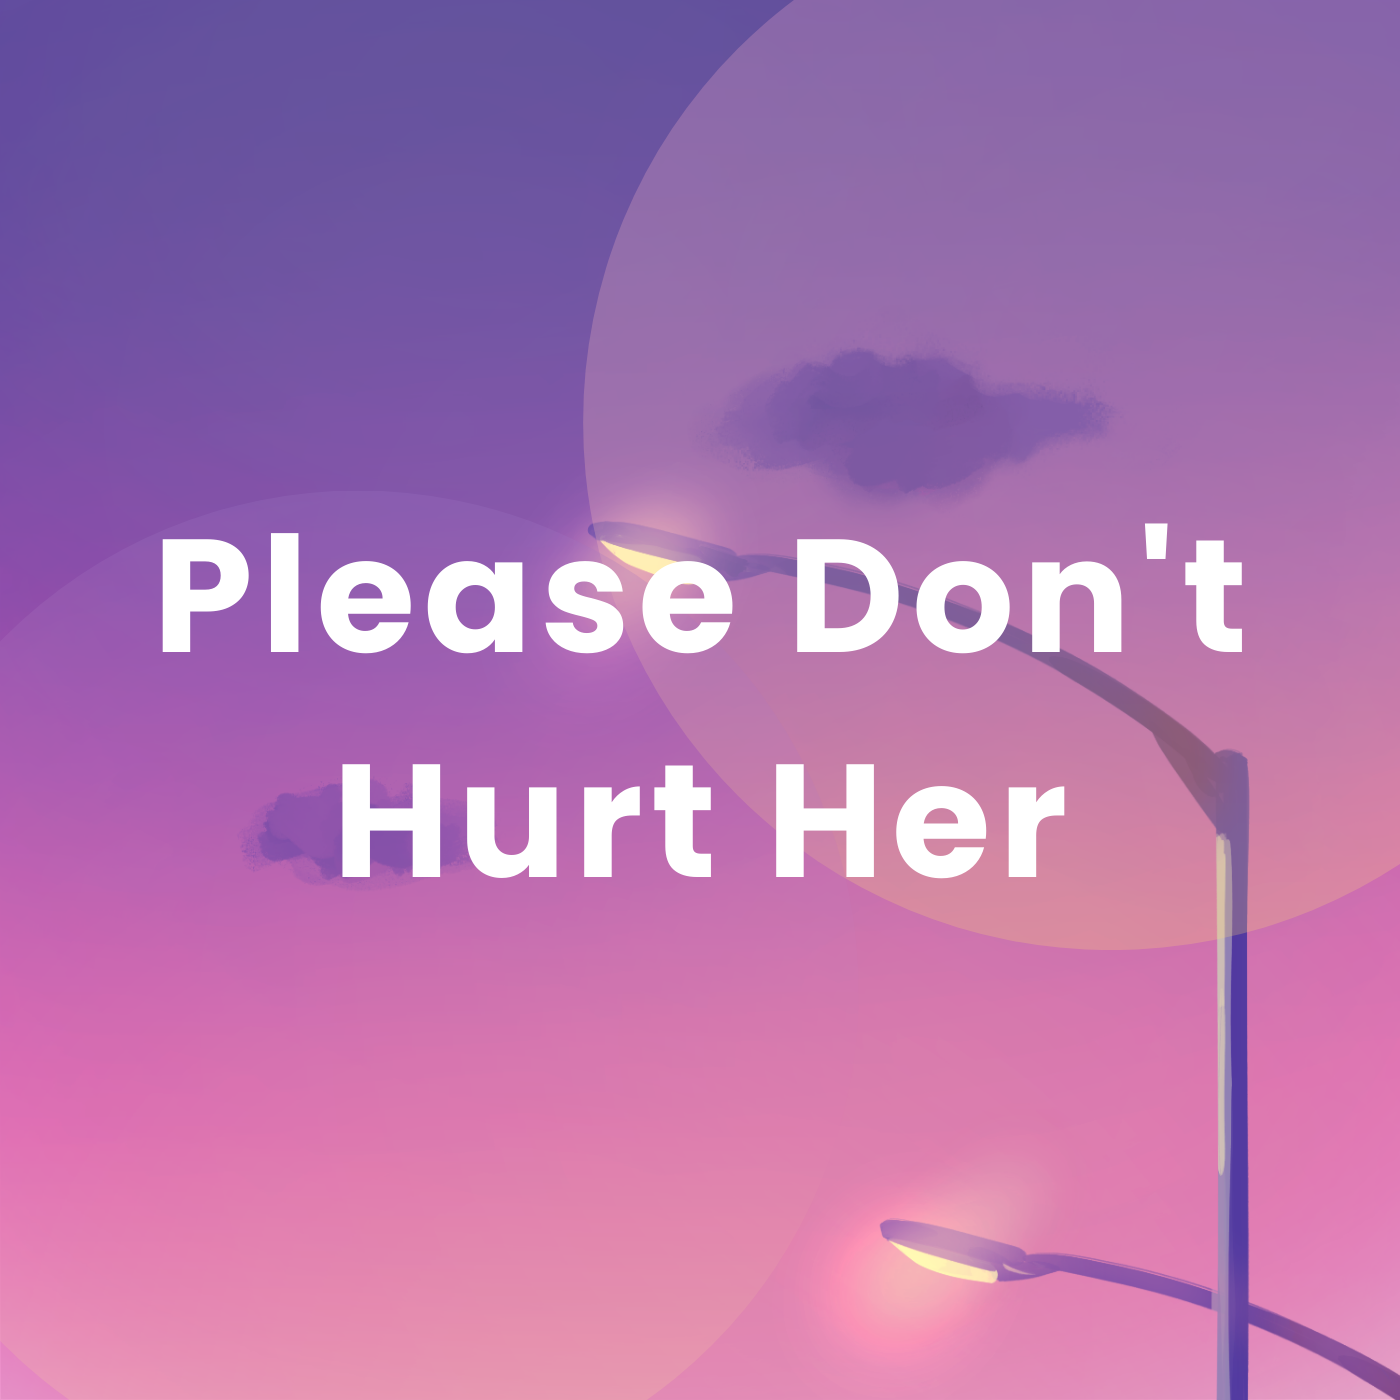 White purple streetlight illustration album-cover with text Please dont hurt her